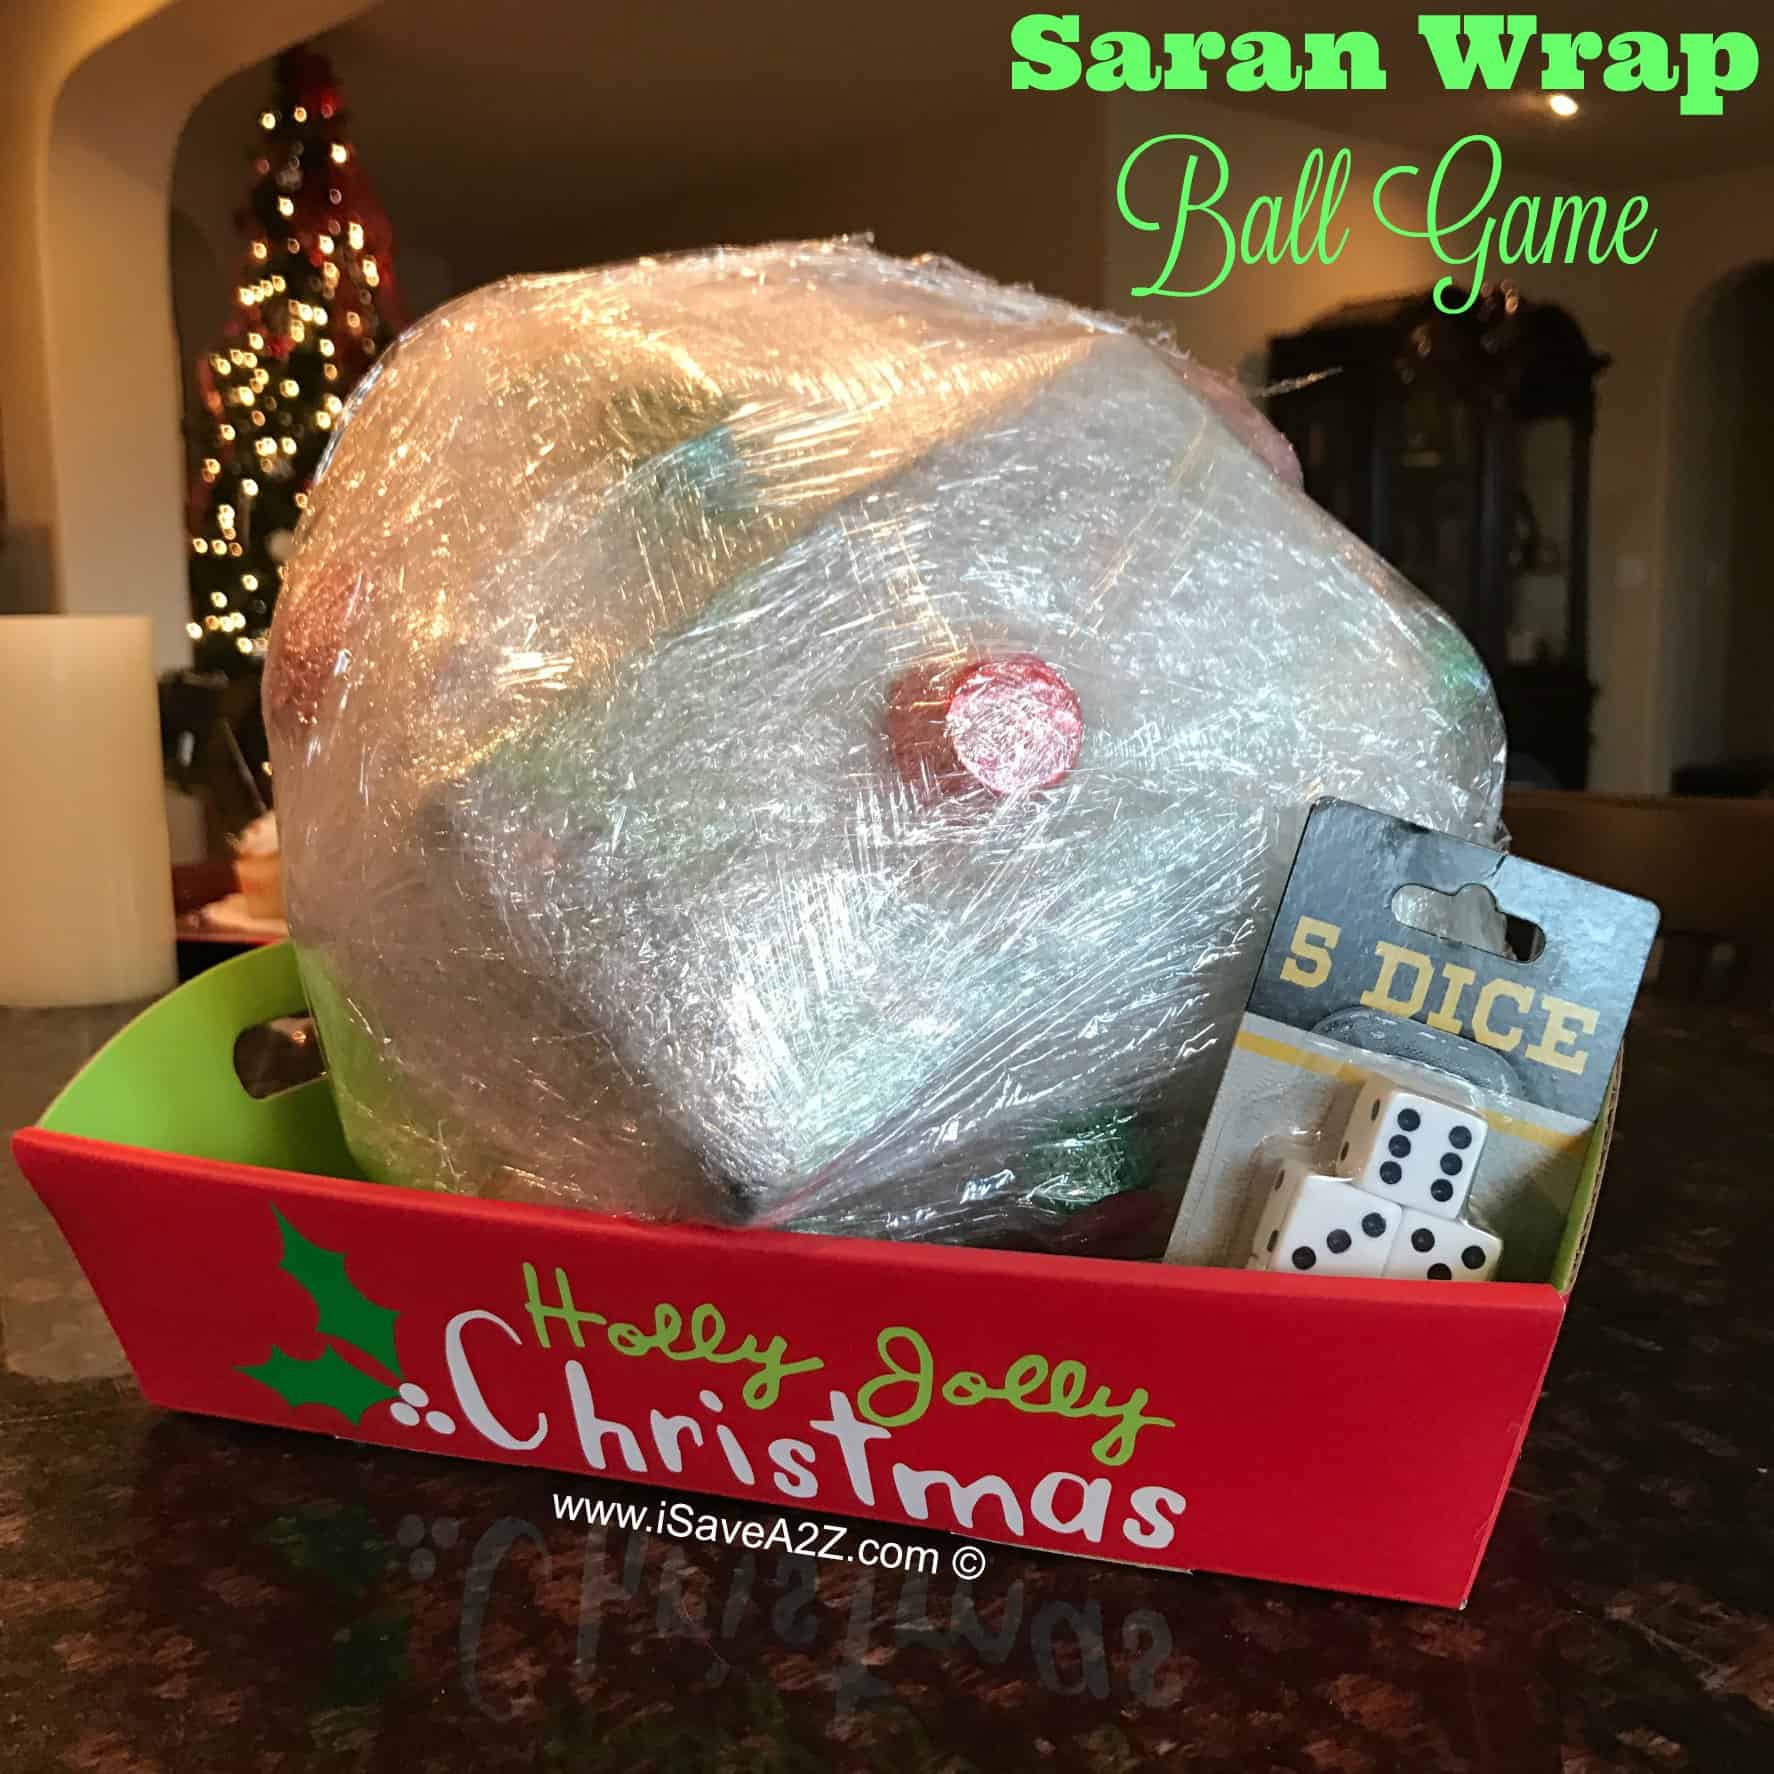 The Saran Wrap Ball Game Rules and Ideas